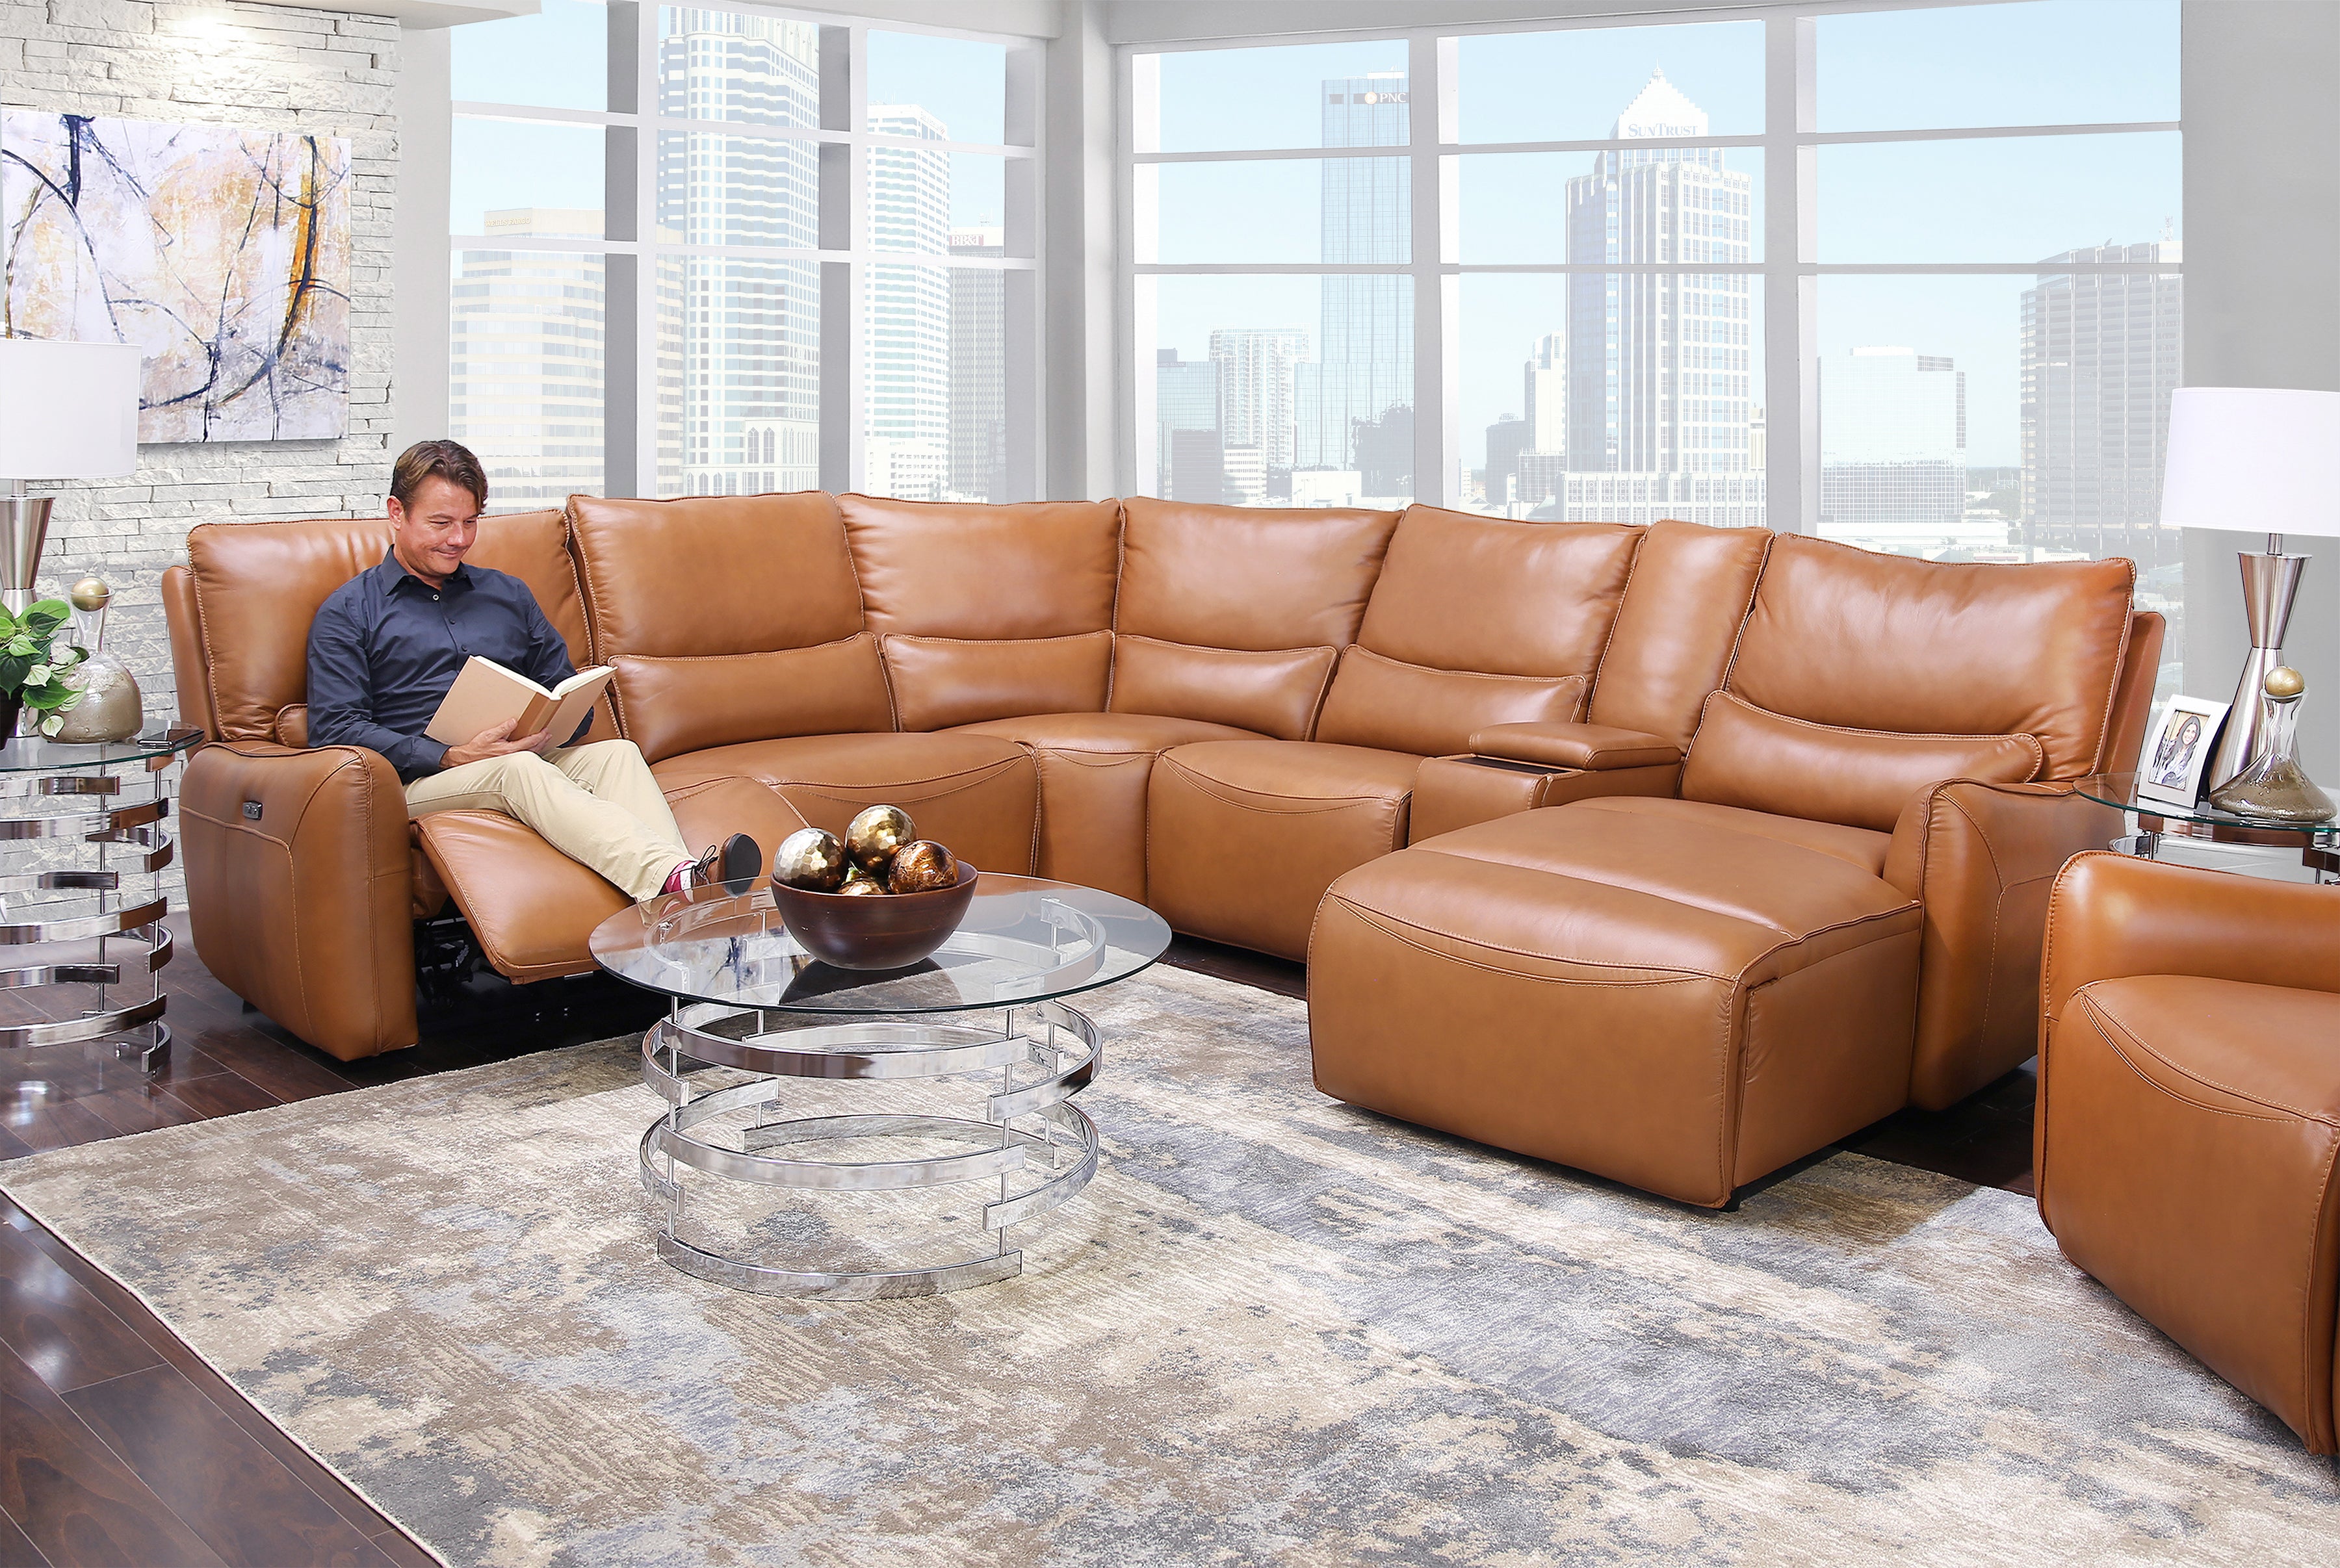 Camel Leather Couch Sectional Leather couch leather couches lounge